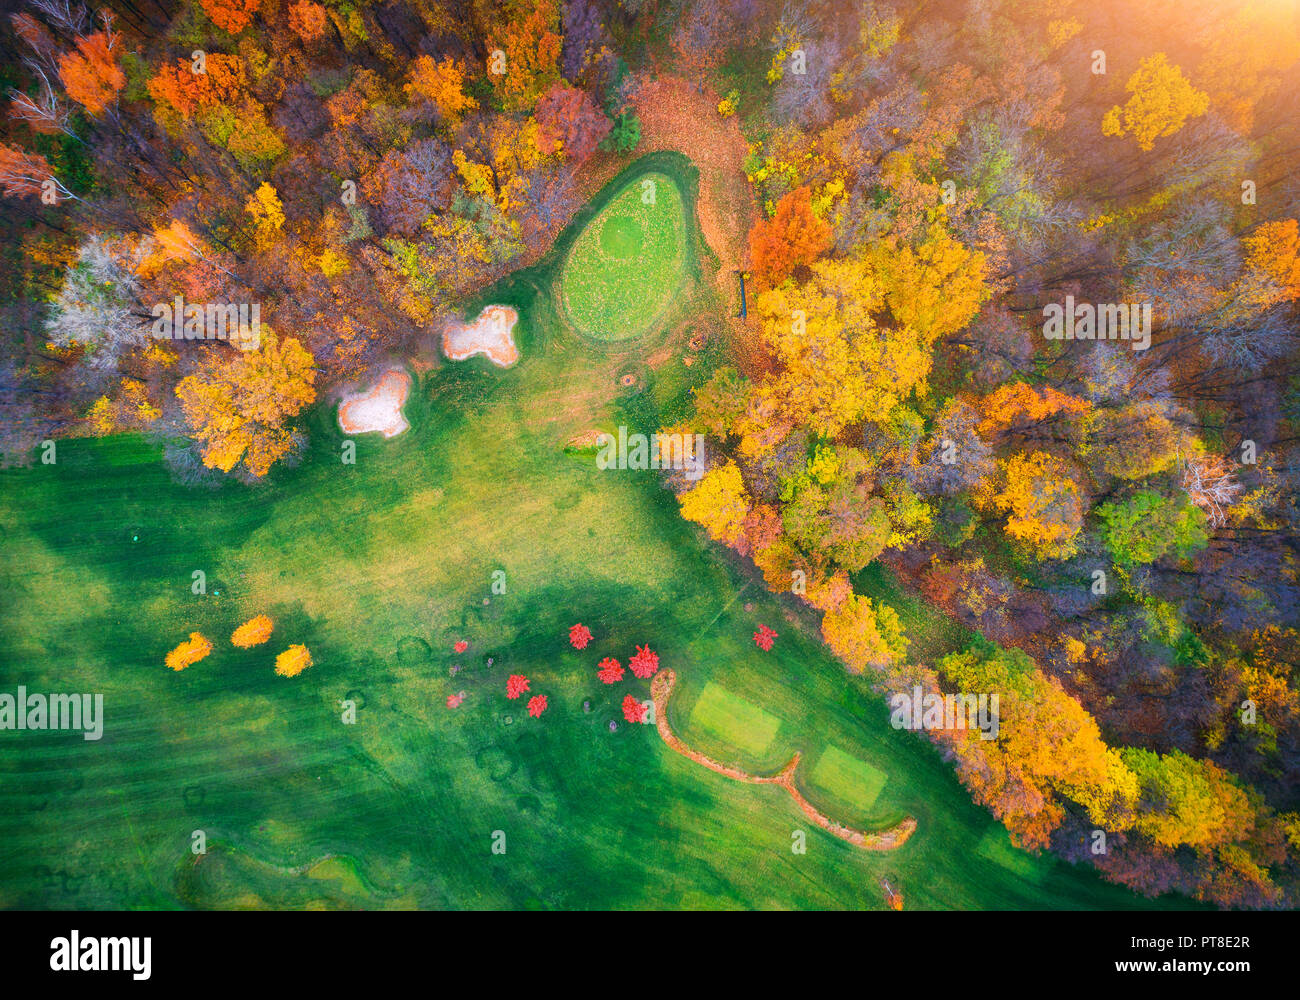 Aerial view of amazing autumn park in europe in the evening. Landscape with trees with colorful leaves, field with green grass and paths in fall. Scen Stock Photo